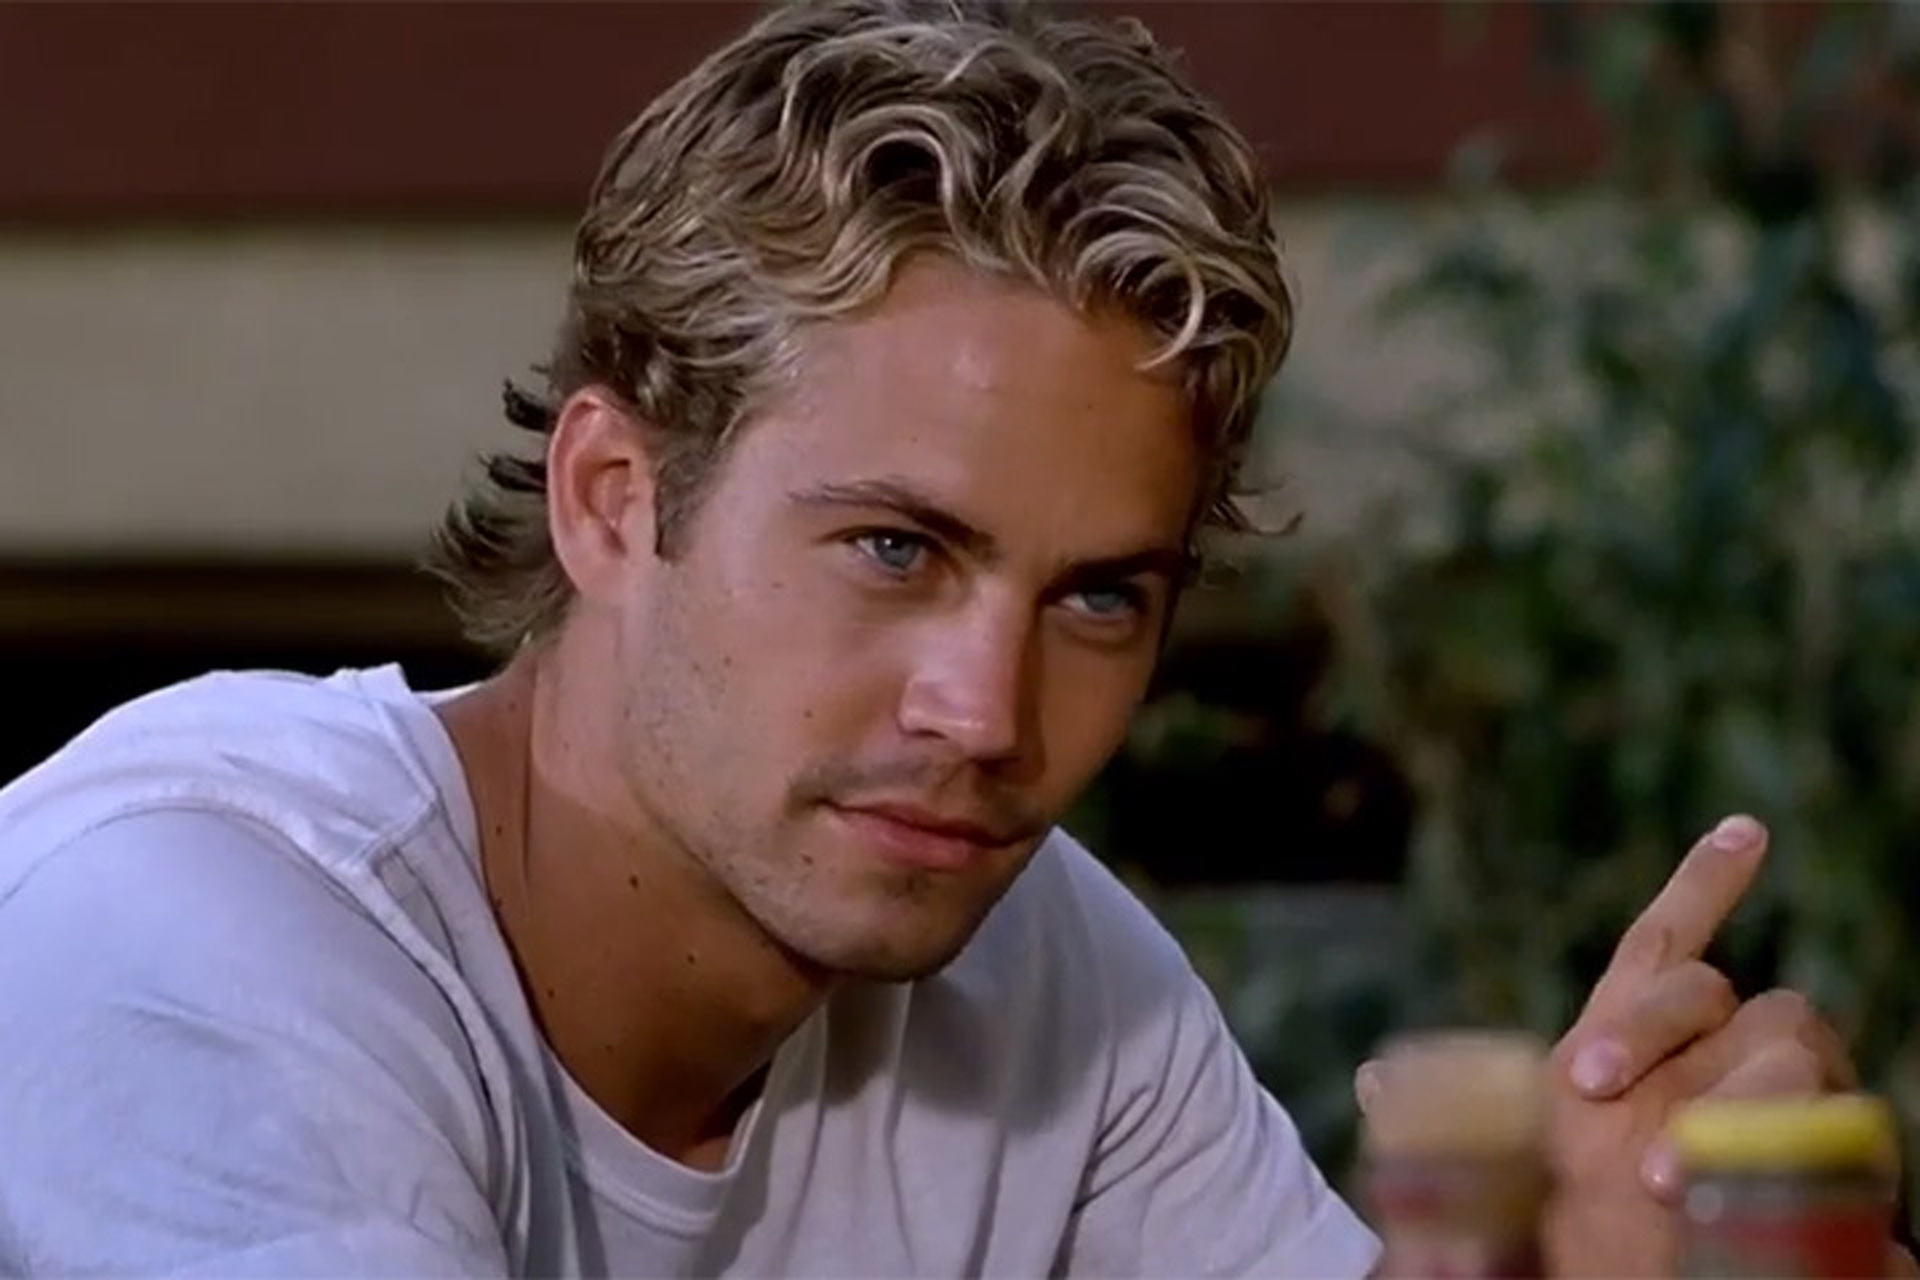 celebrities who committed crimes - I don't think he was ever arrested but wasn't Paul Walker dating under-age